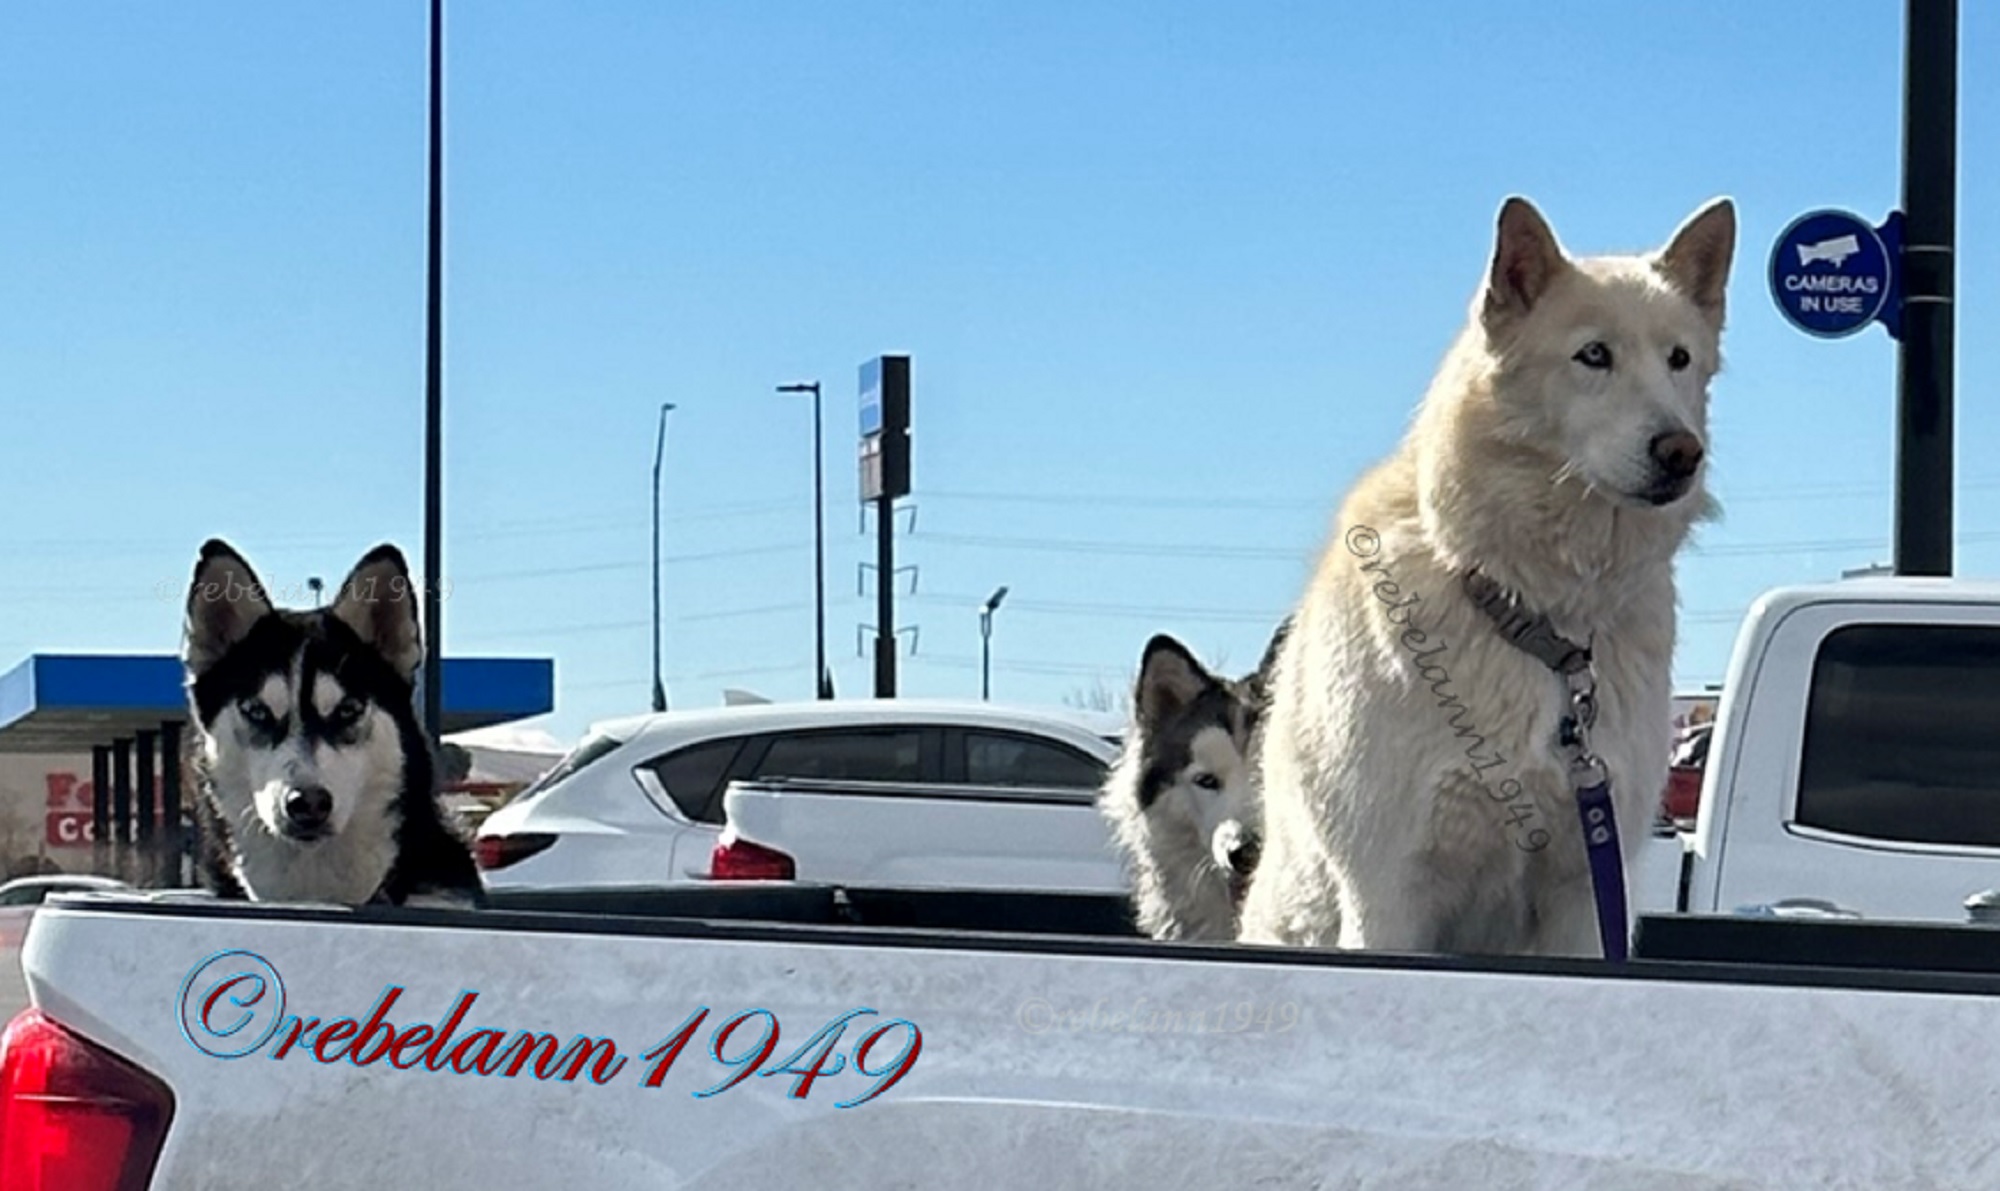 I saw these 4 dogs in the back of a pickup on Jan 18 and had to get a shot and video of them